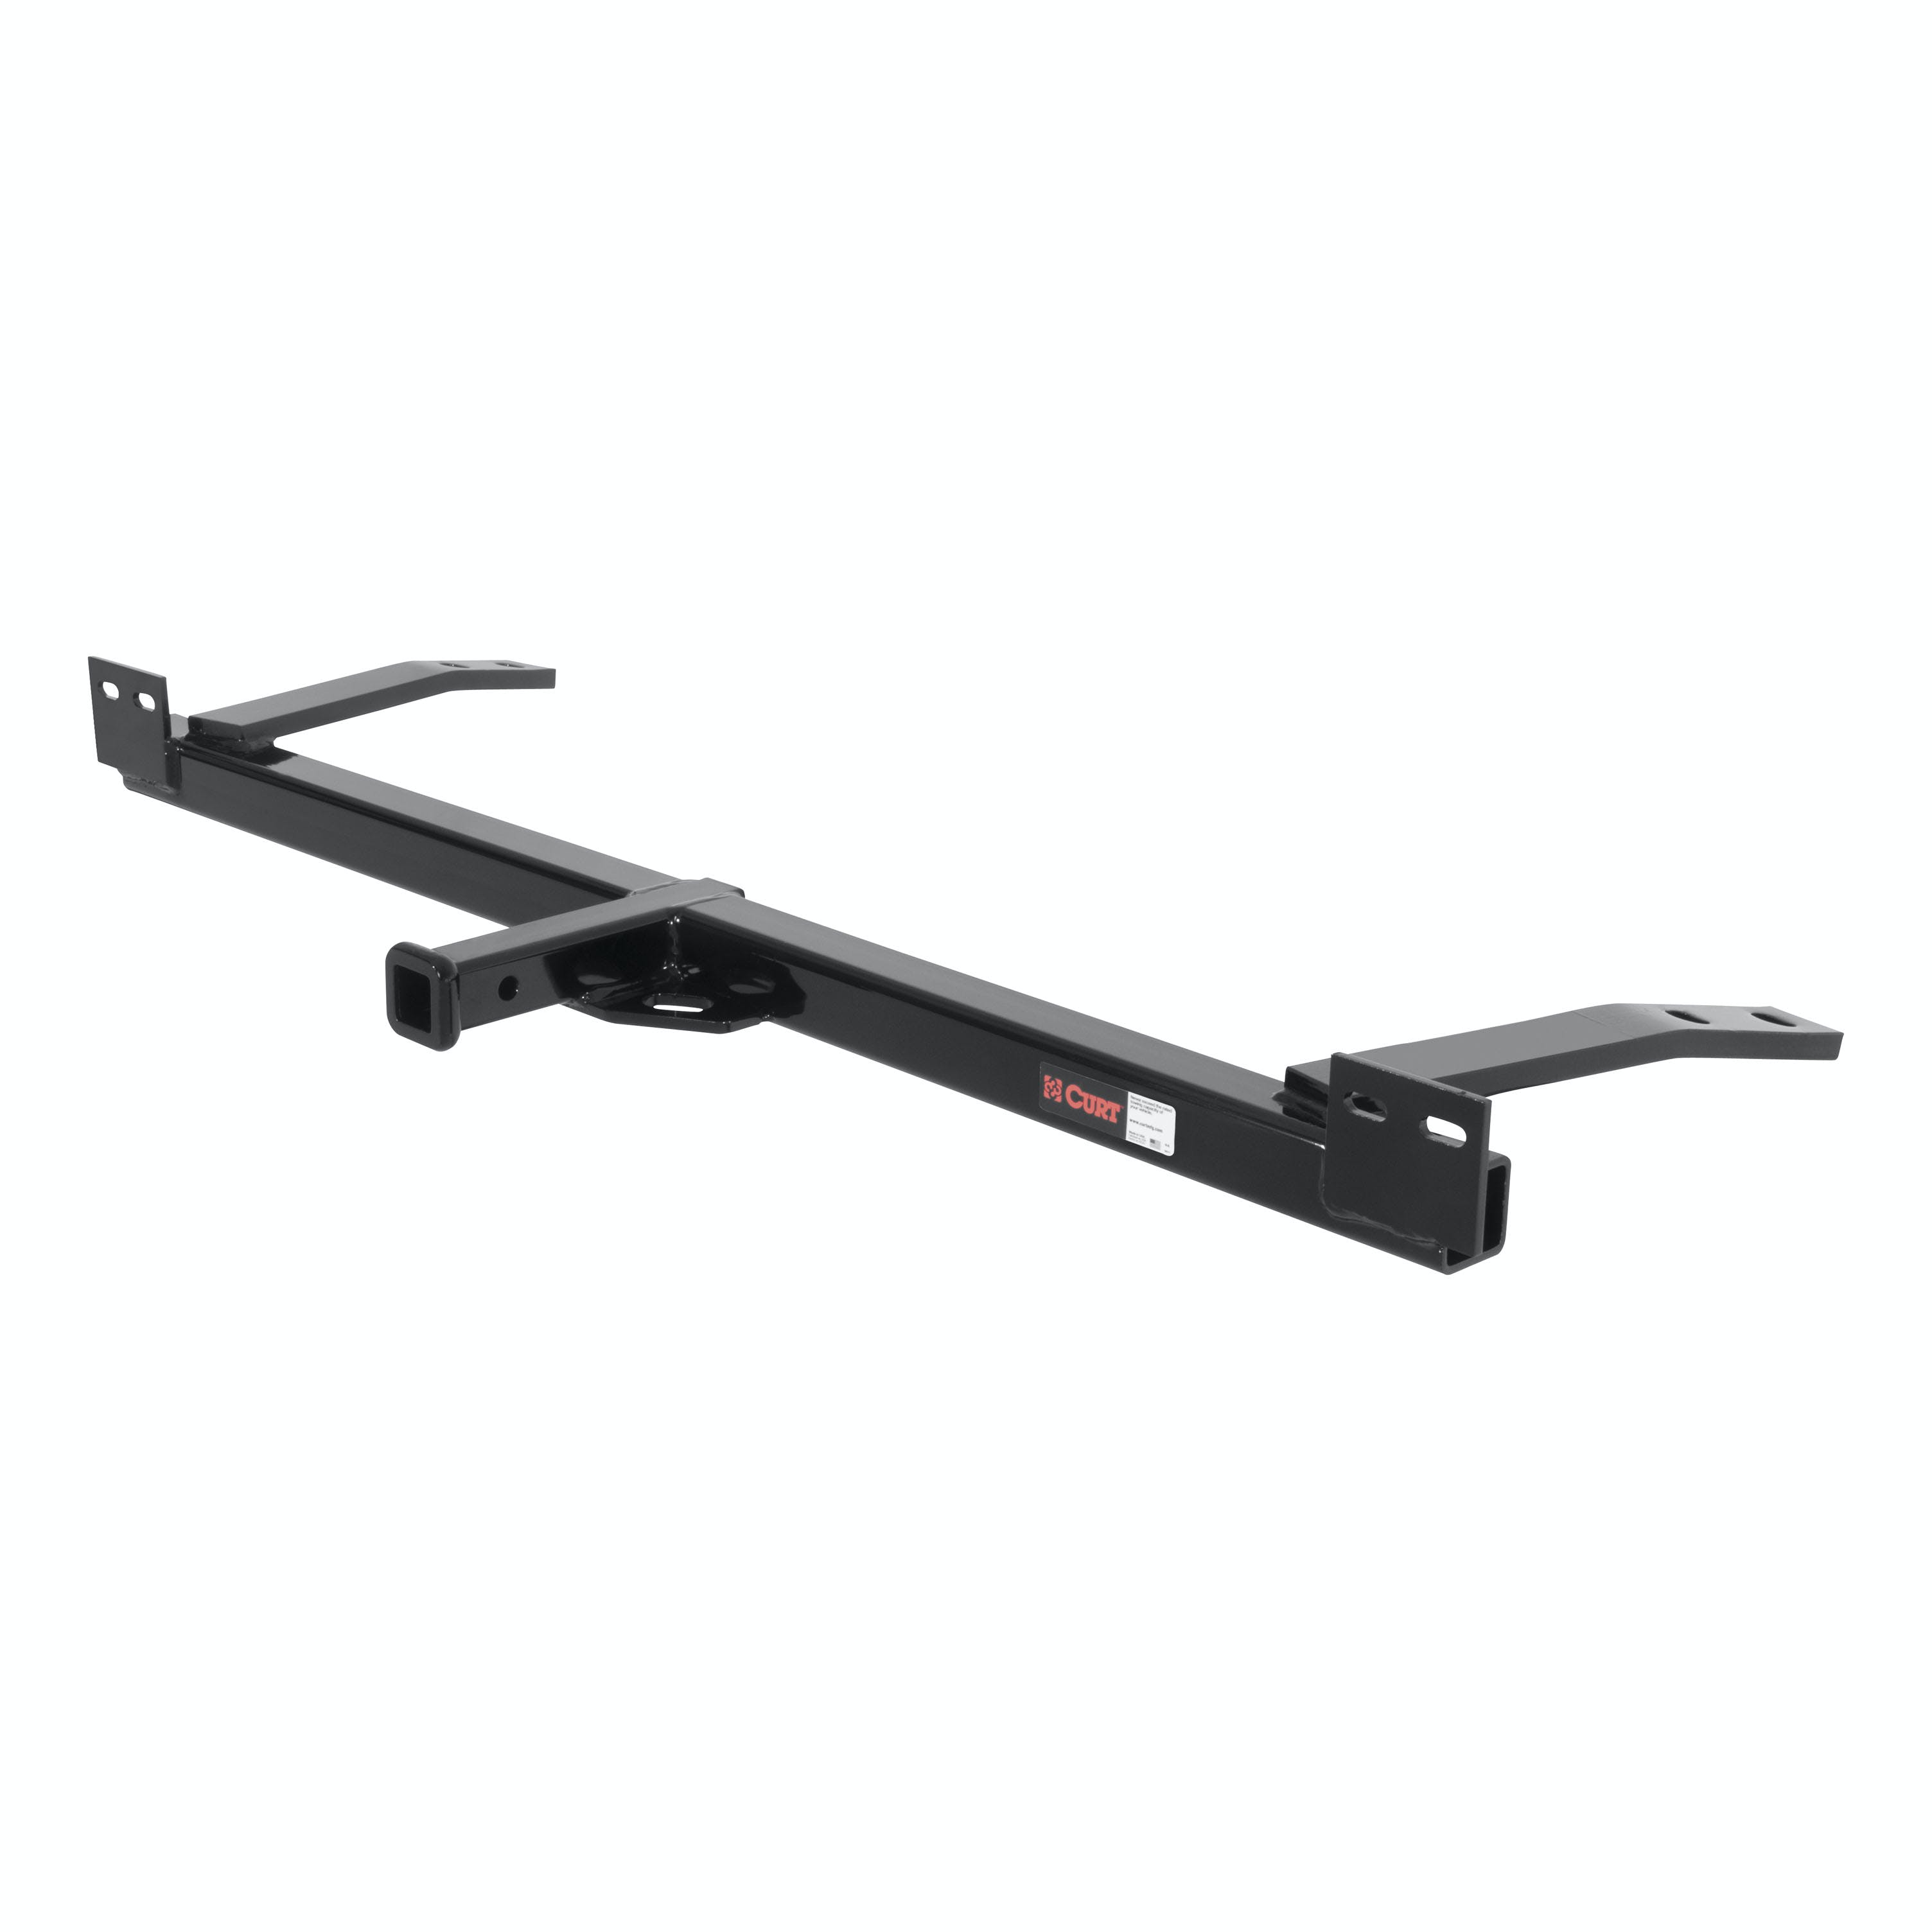 CURT 12009 Class 2 Hitch, 1-1/4, Select Buick, Chevrolet, Oldsmobile, Pontiac (Exposed)